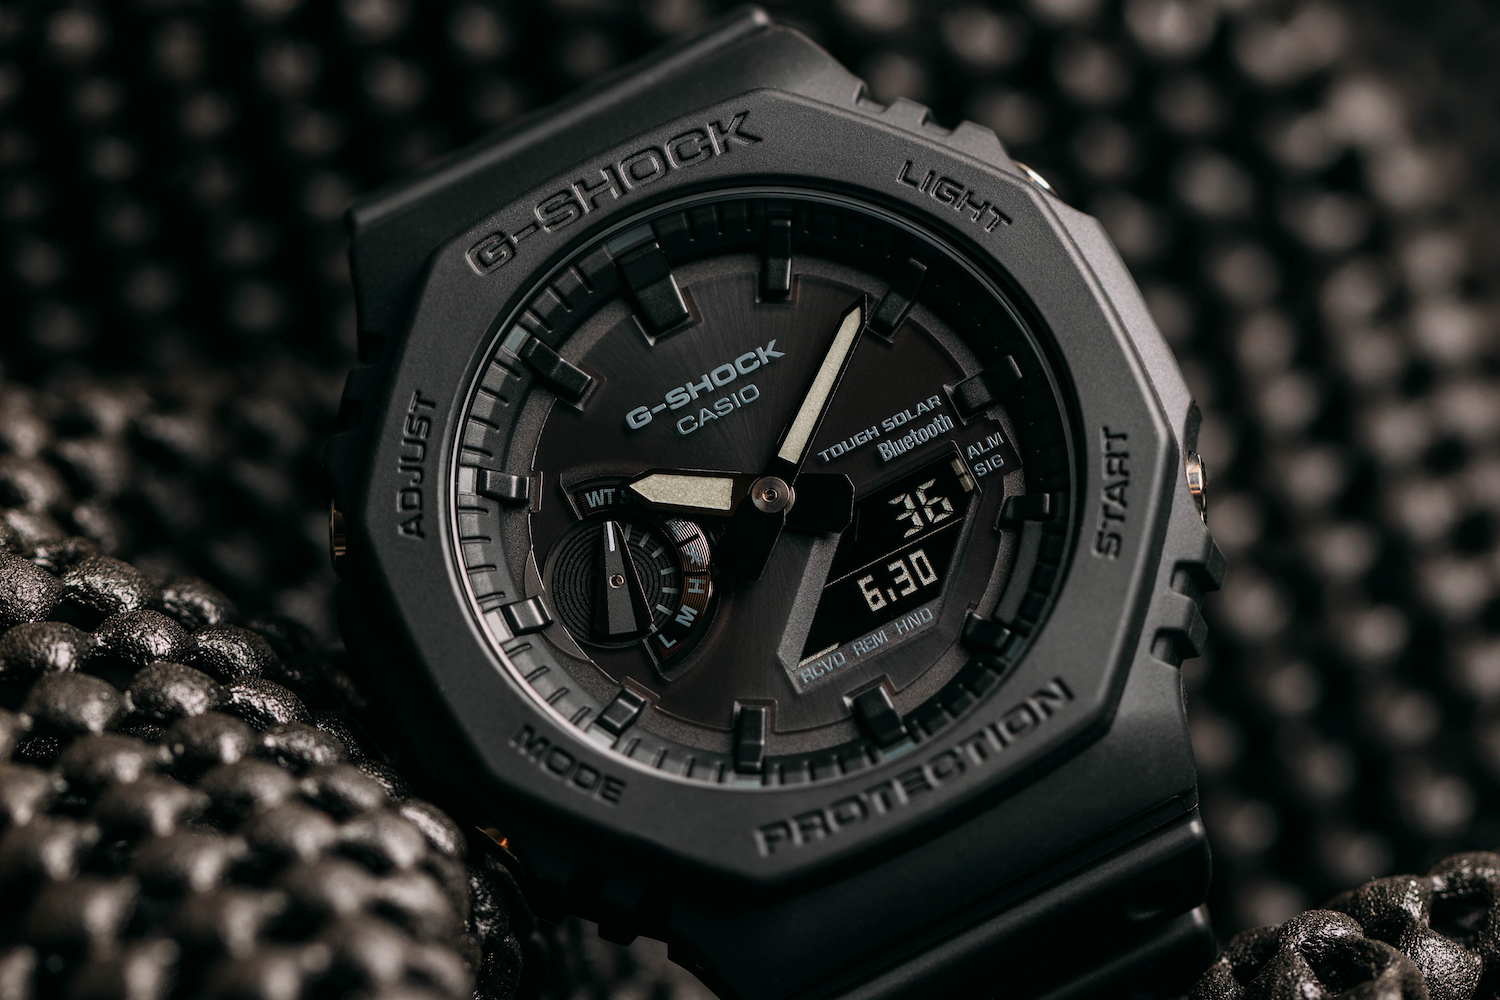 Casio adds Bluetooth and solar to the hugely popular GA-2100 